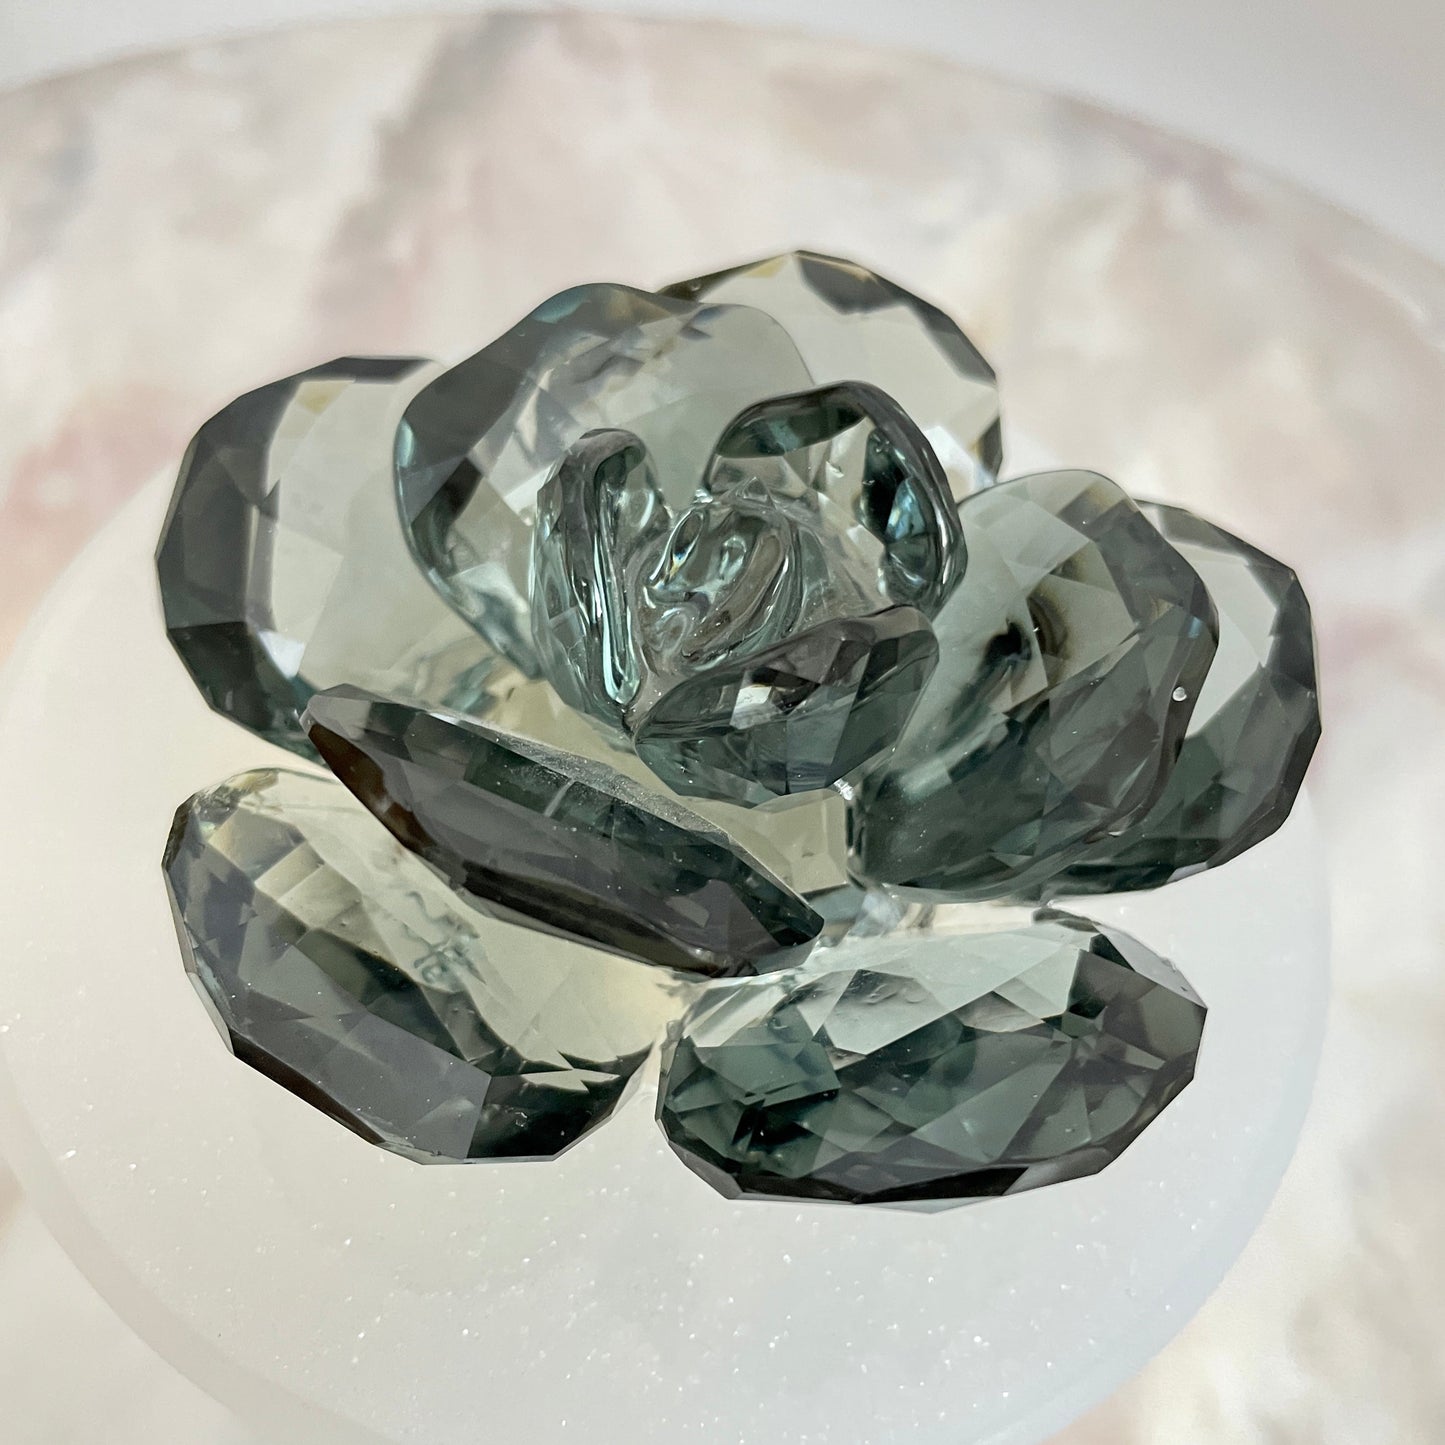 Exquisite Crystal Flower Resin Silicone Mold: Craft Stunning Floral Creations